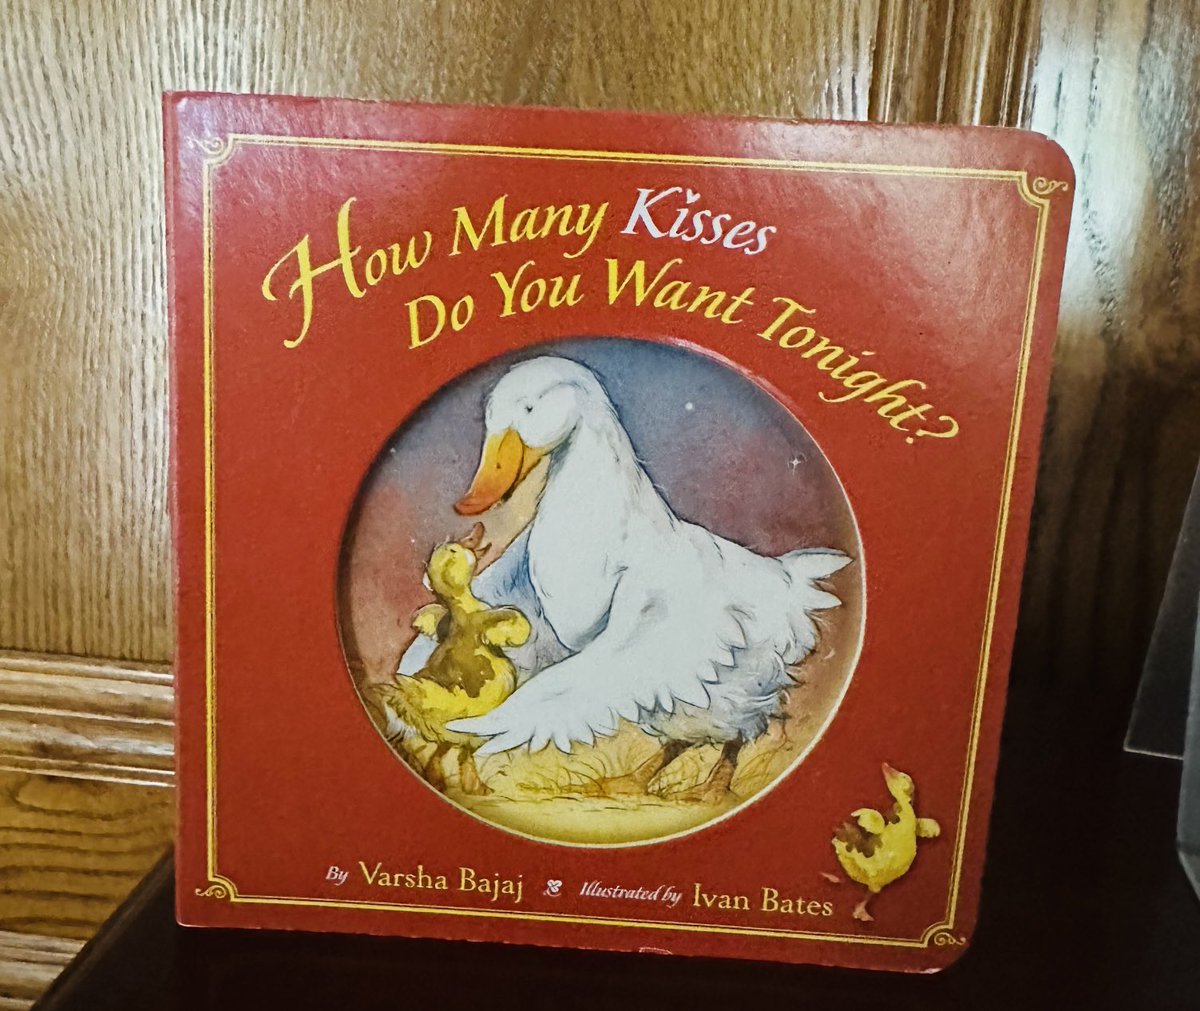 Hey picture book lovers! I’m celebrating the 20th anniversary of my pb “How Many Kisses Do You Want Tonight?” illustrated by Ivan Bates with a giveaway of the board book edition. To enter follow, tag, or retweet. US only. #BedtimeStories #RhymingTexts. Ends on 3/25/24